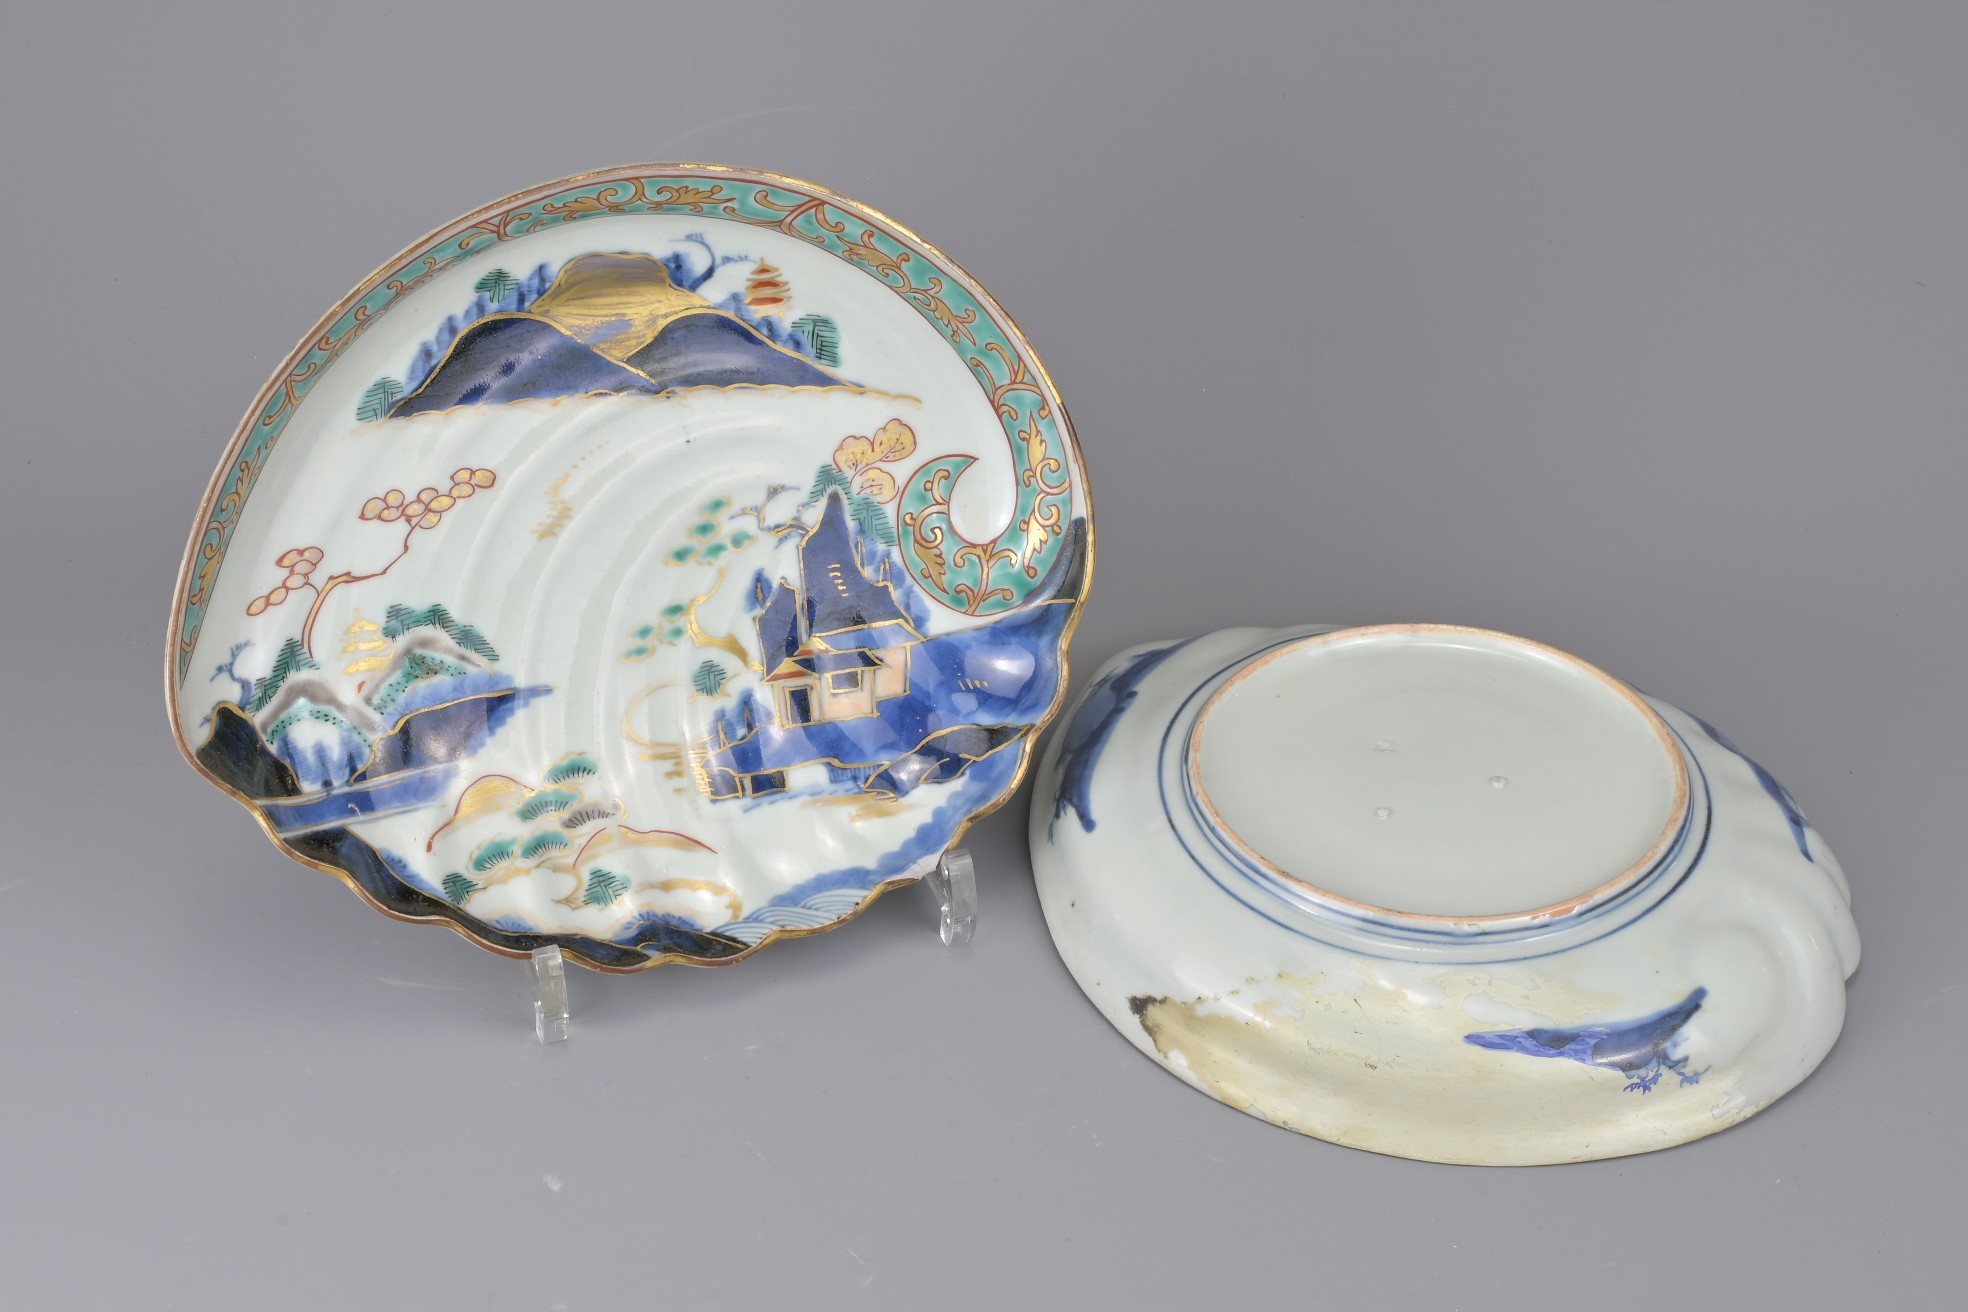 A PAIR OF JAPANESE ARITA PORCELAIN DISHES, 18/19TH CENTURY. Abalone shell form decorated with - Image 3 of 6